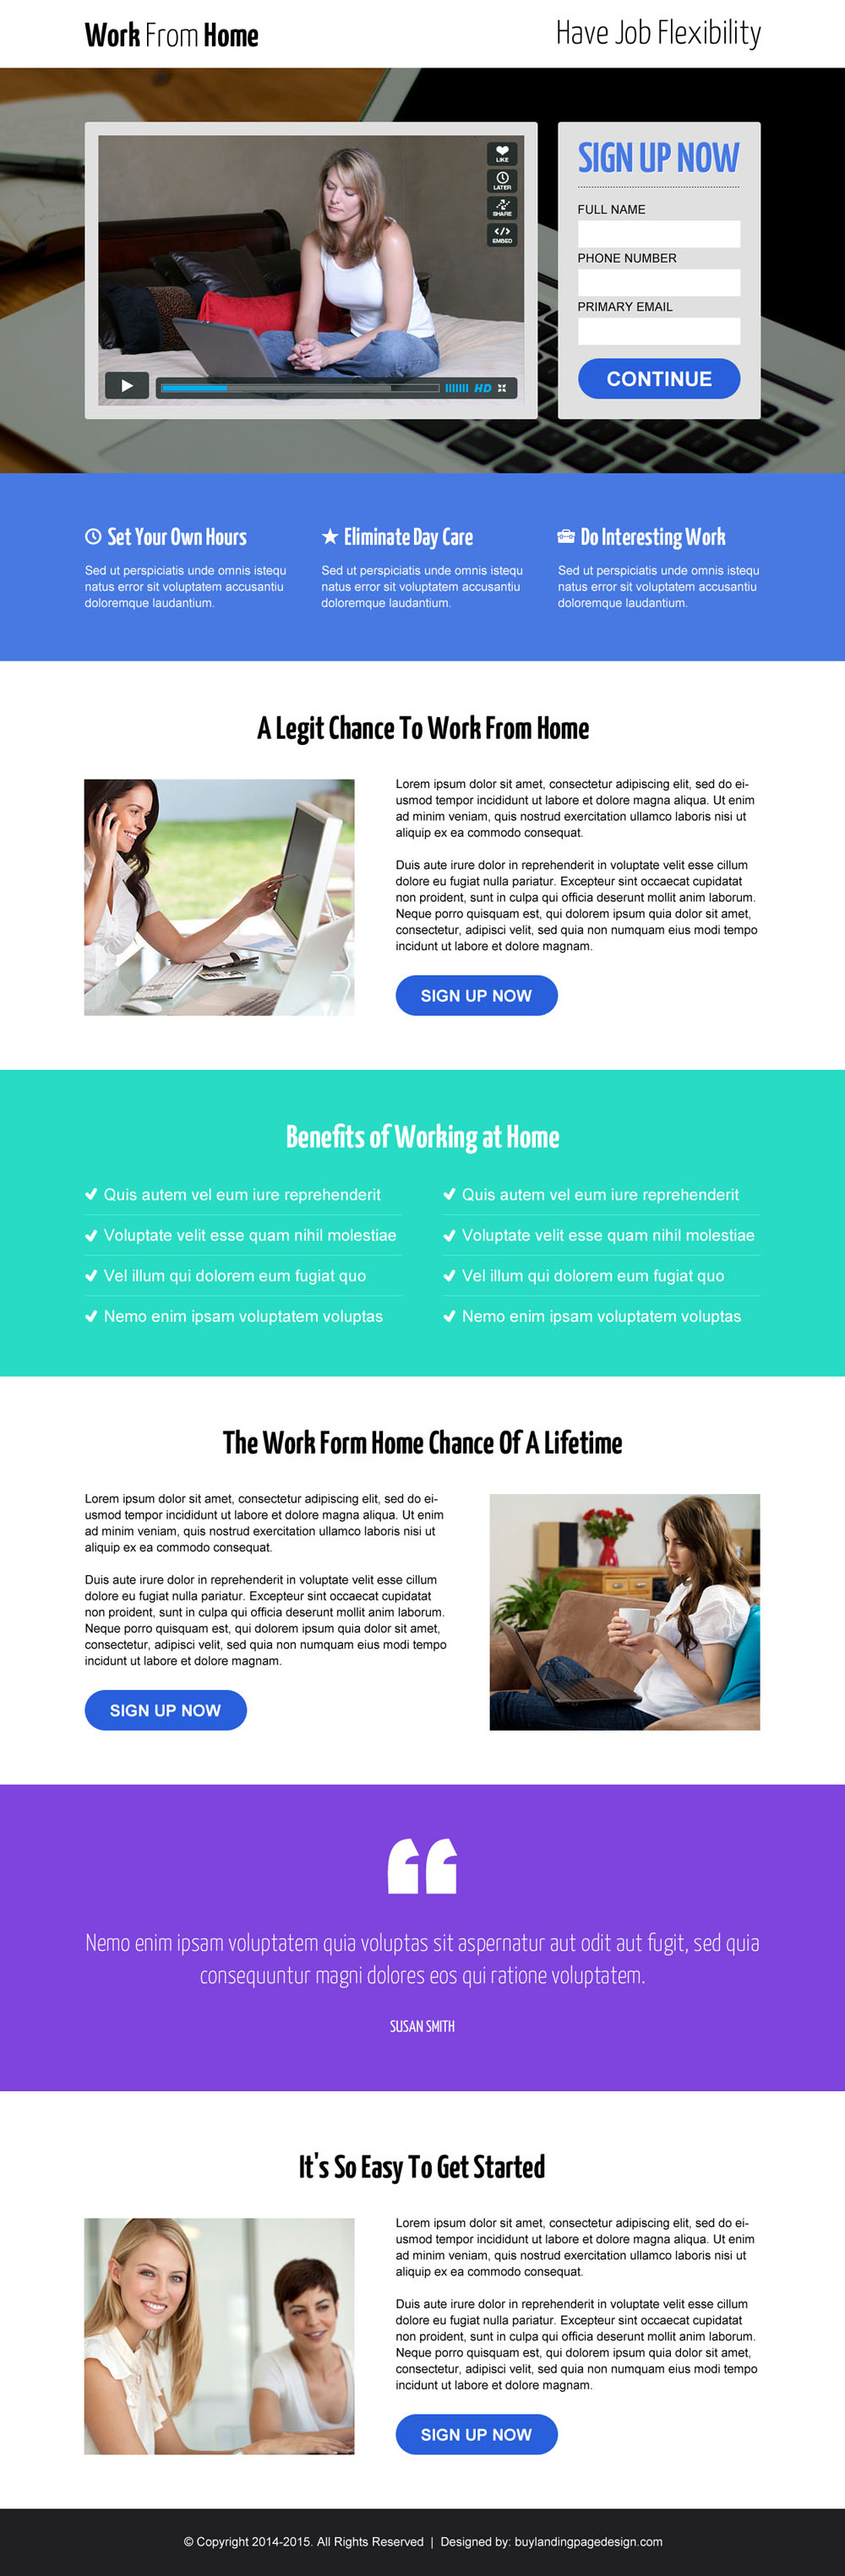 work-from-home-video-lead-capture-landing-page-design-template-023